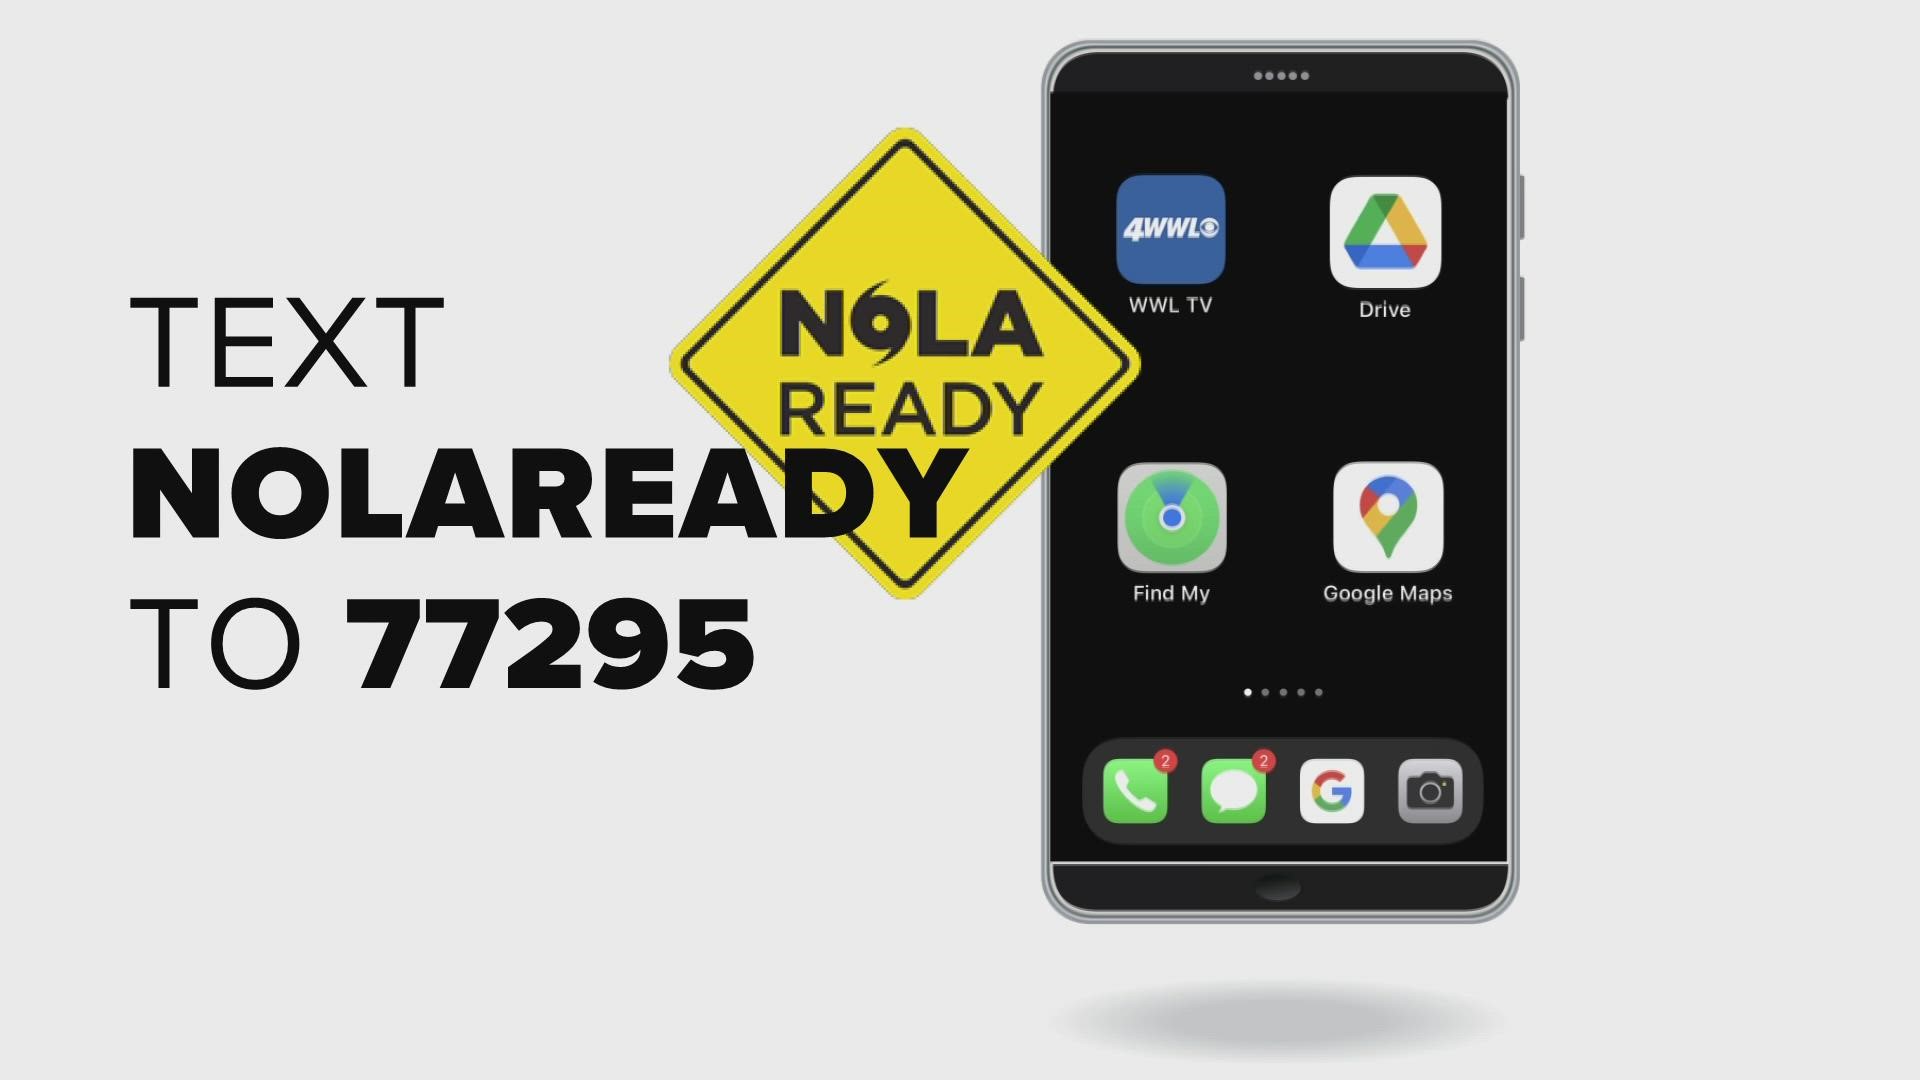 While there’s no active hurricane threat to Louisiana right now. There are still some preparations you can make ahead of time with the device in your pocket.